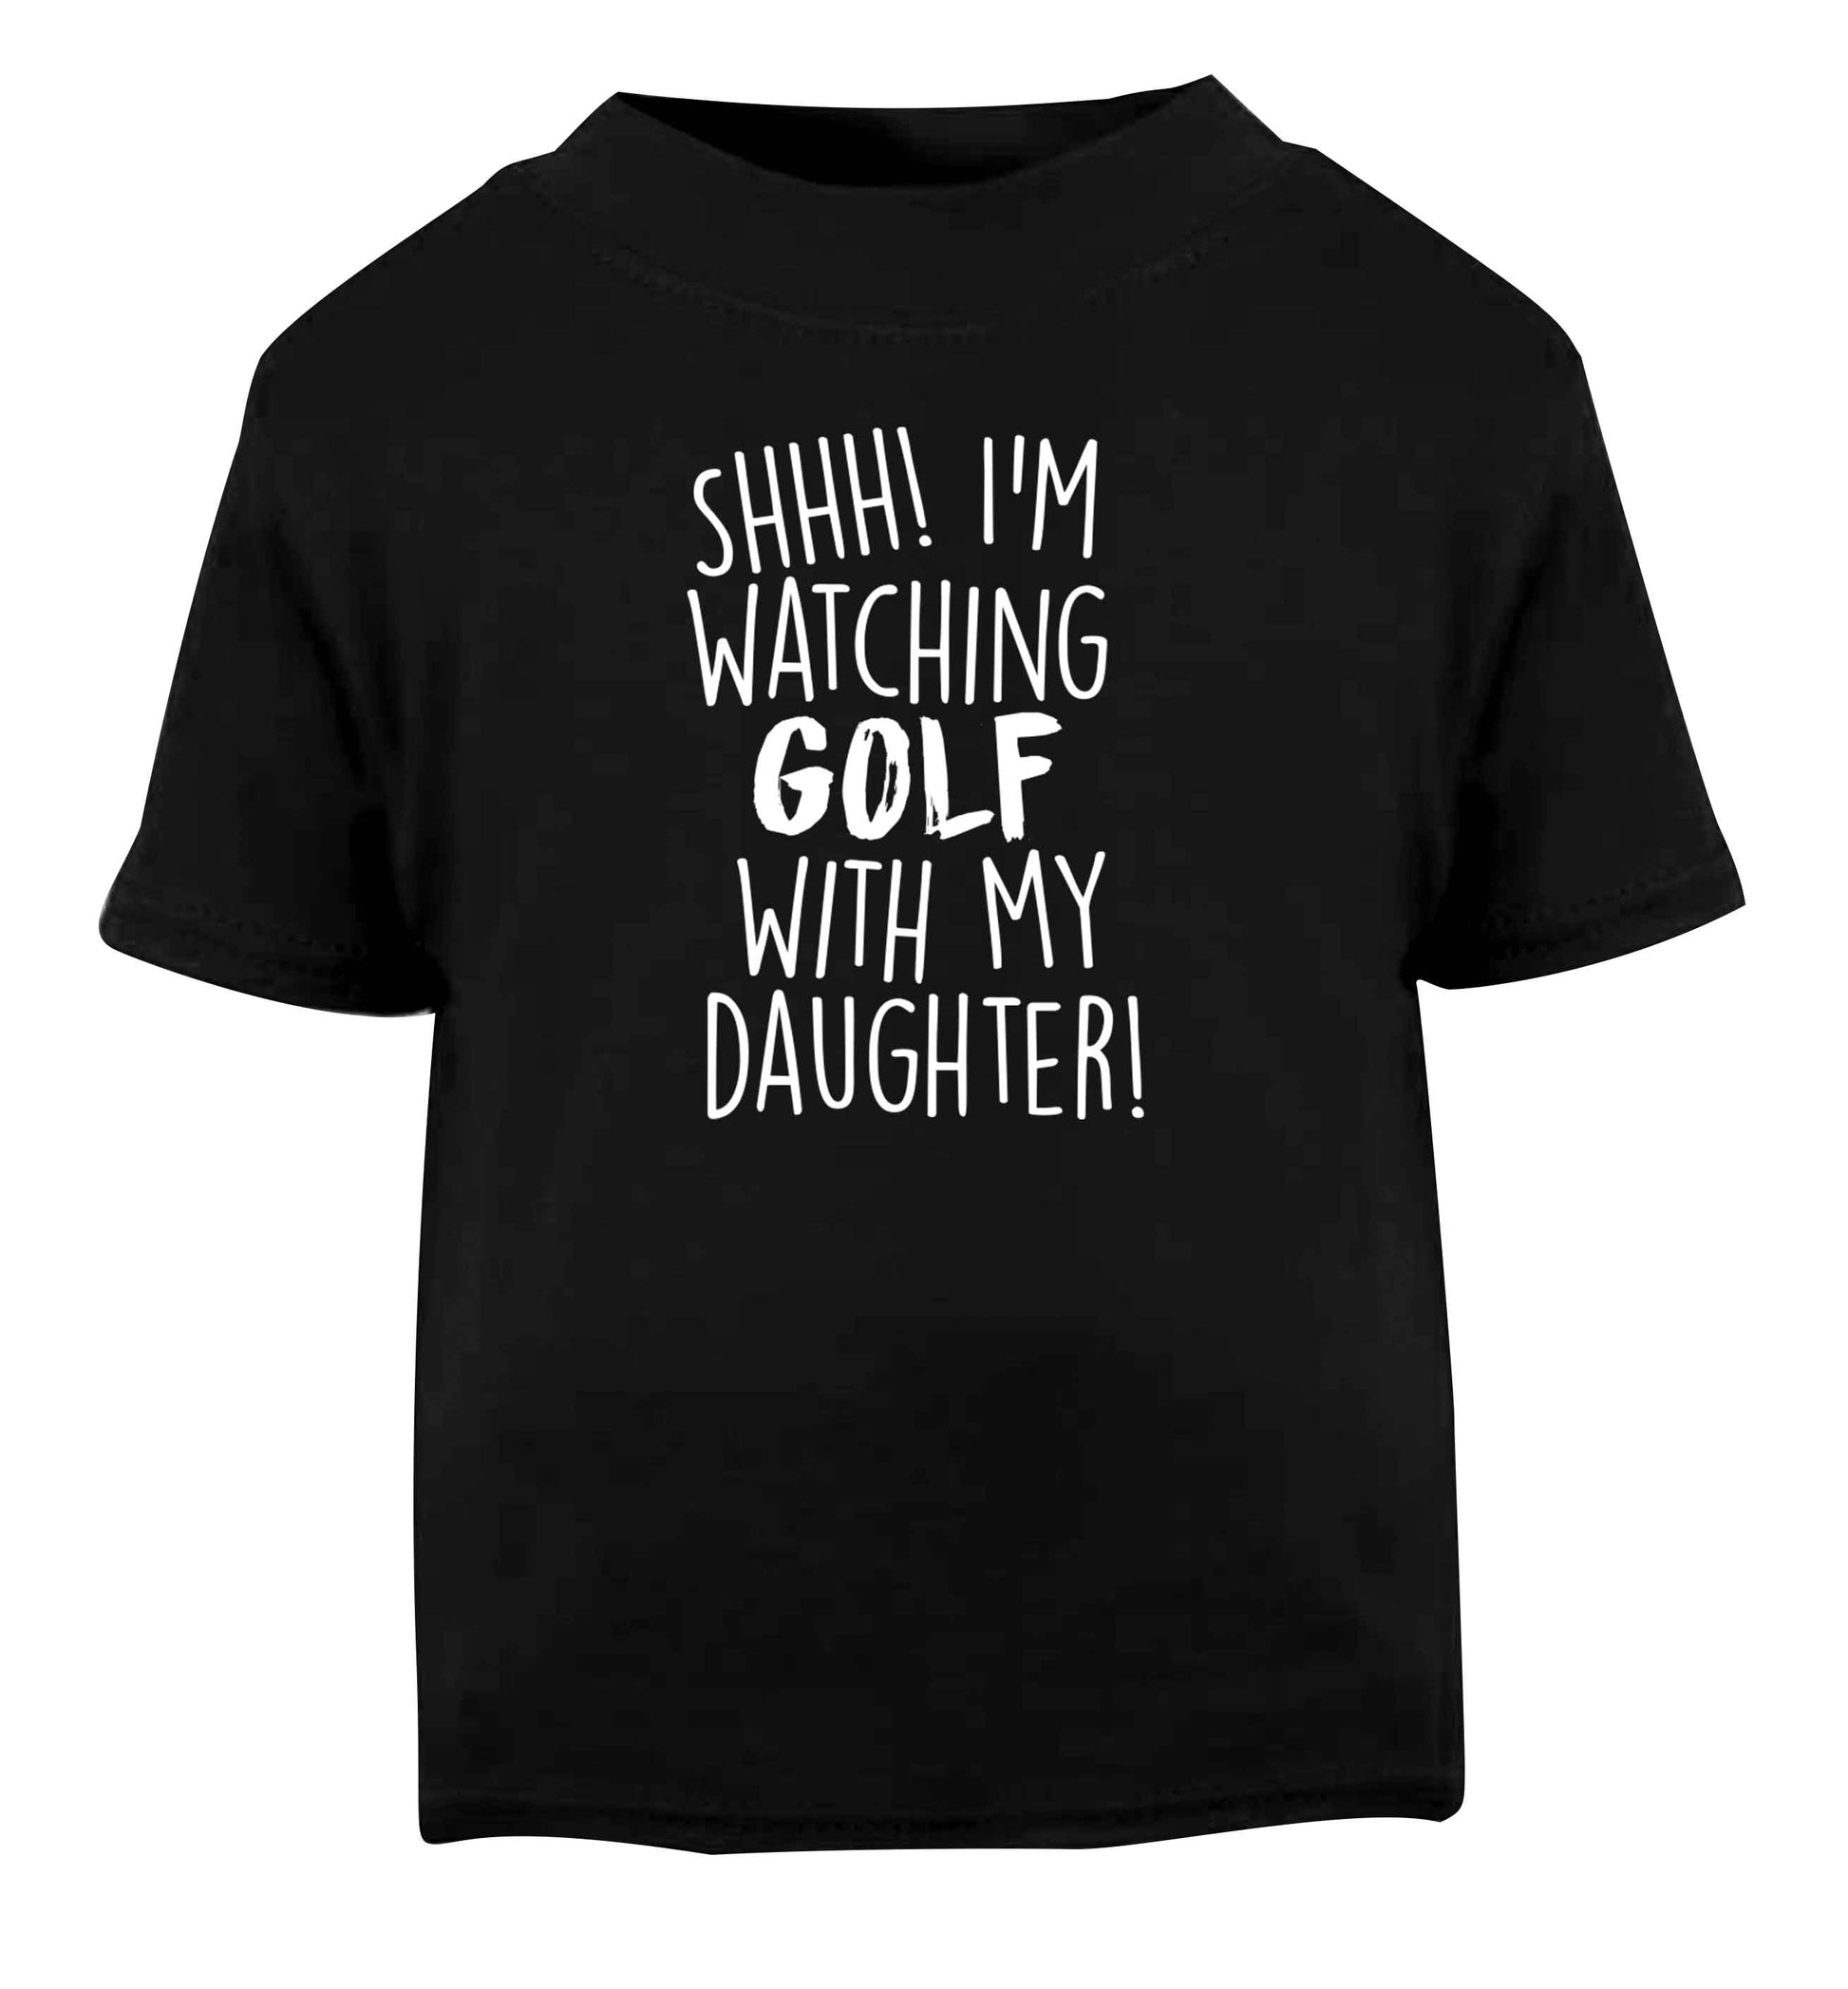 Shh I'm watching golf with my daughter Black Baby Toddler Tshirt 2 years